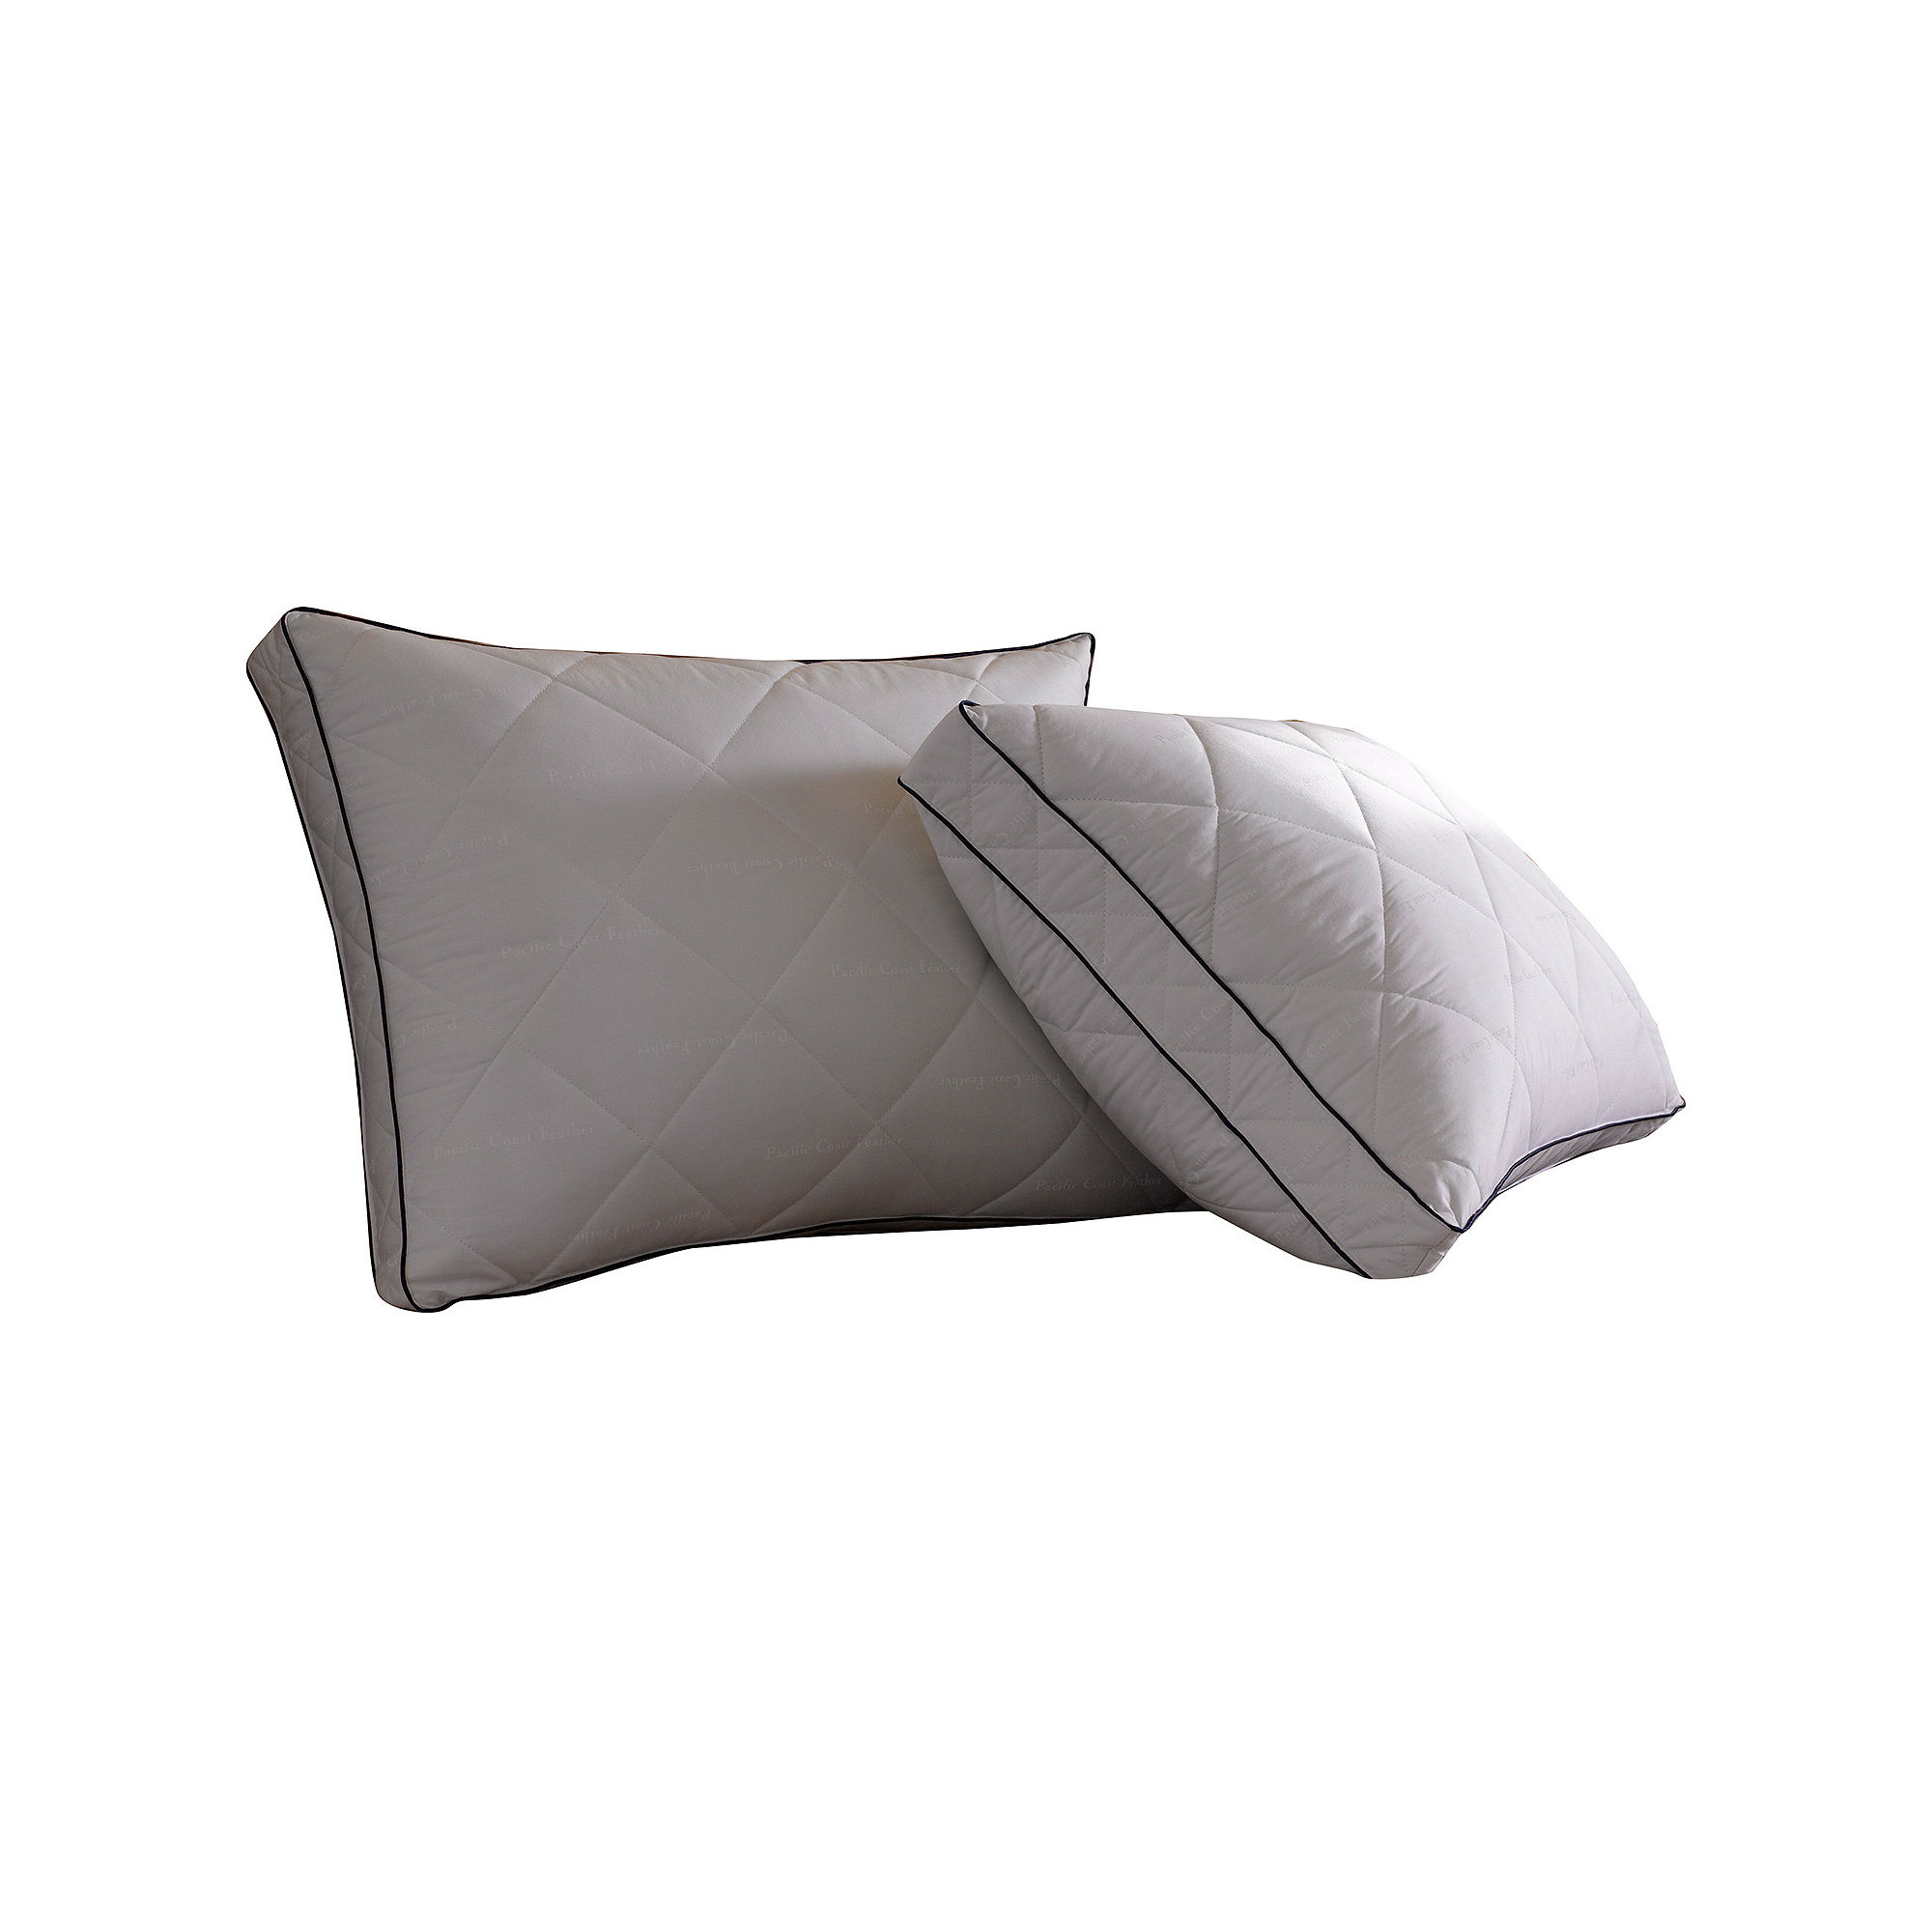 UPC 025521248687 product image for Pacific Coast Quilted Resilia Feather Pillow | upcitemdb.com